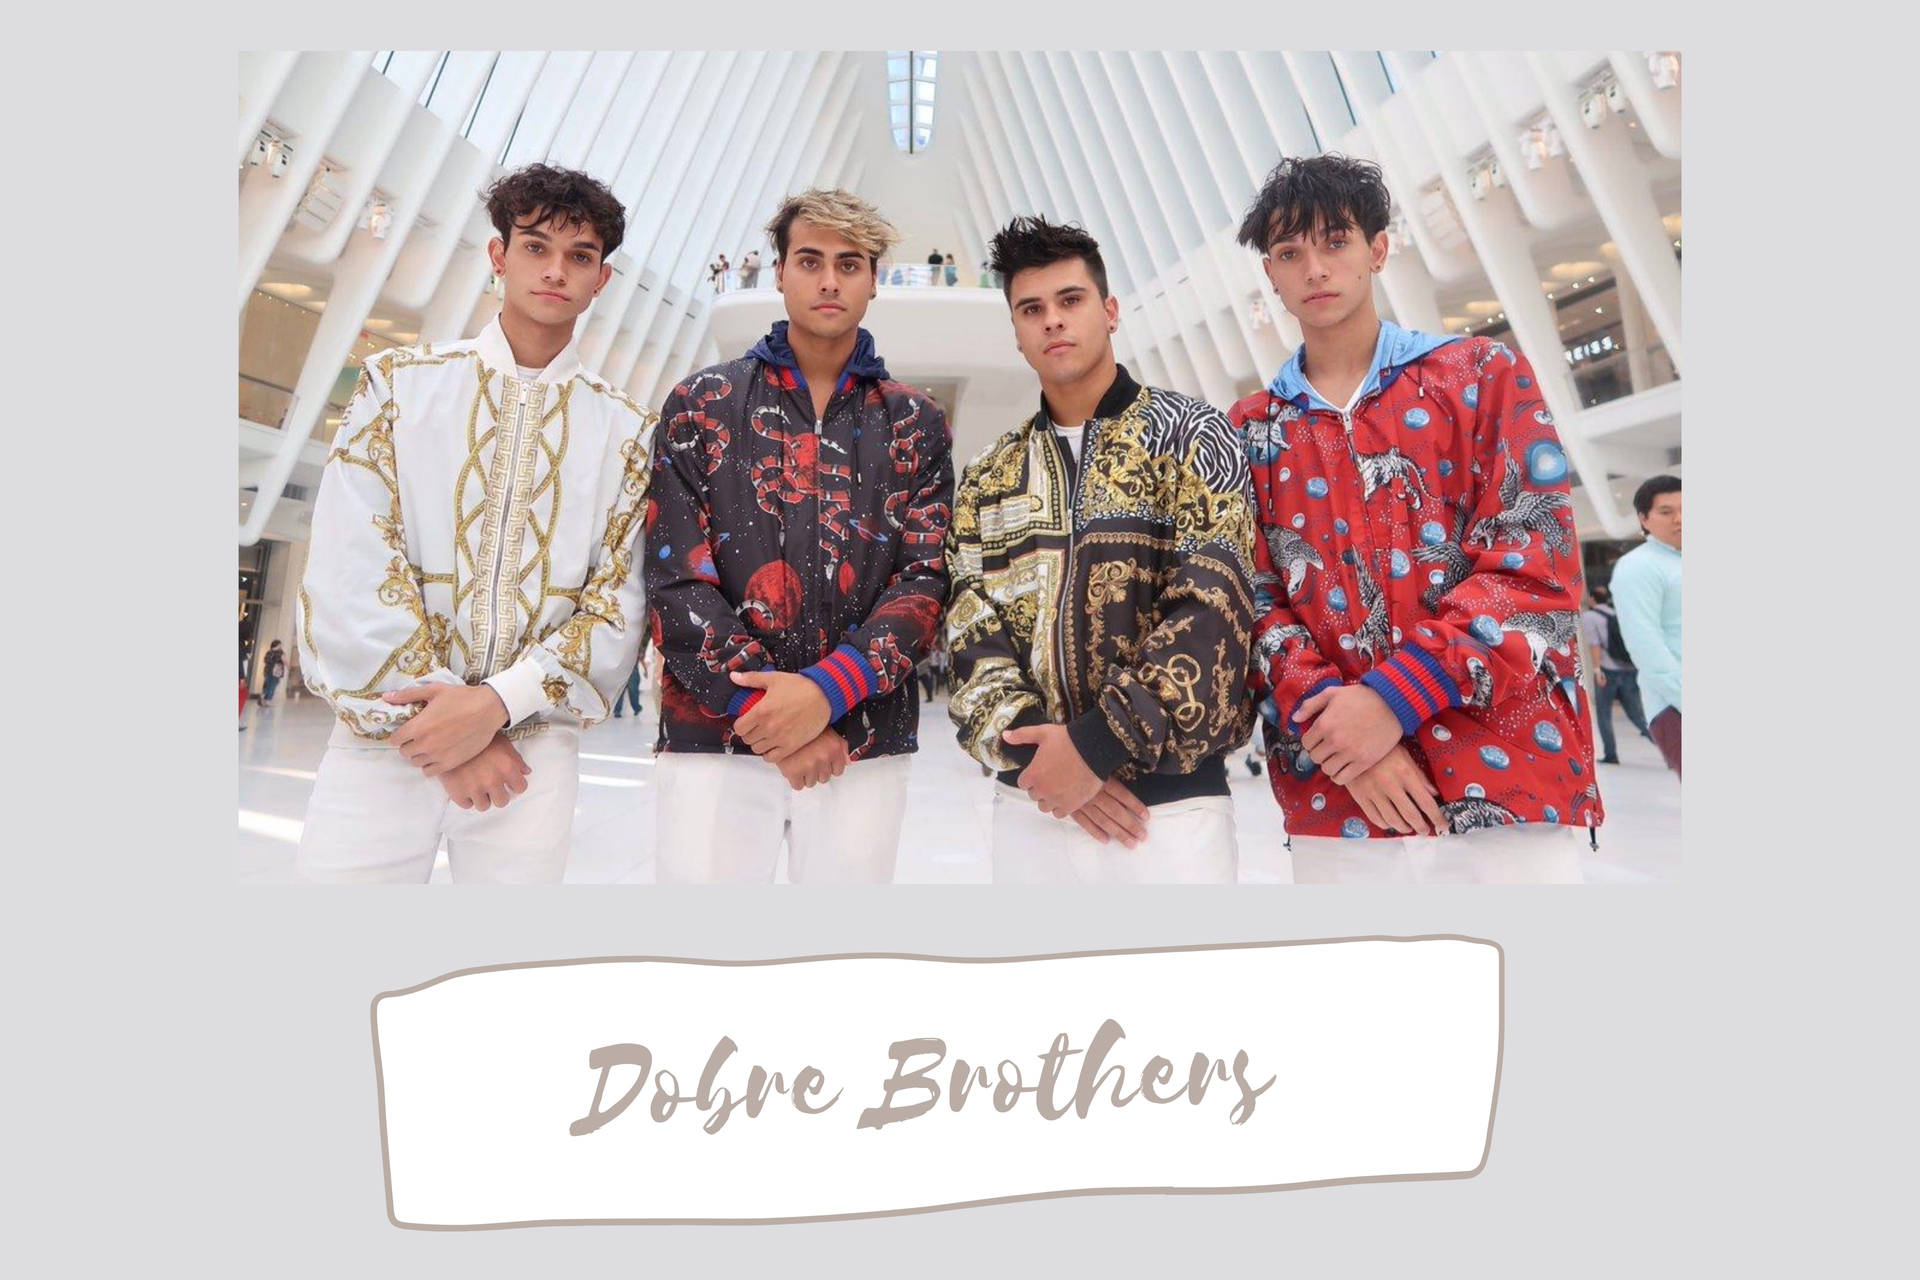 Dobre Brothers Background Photos